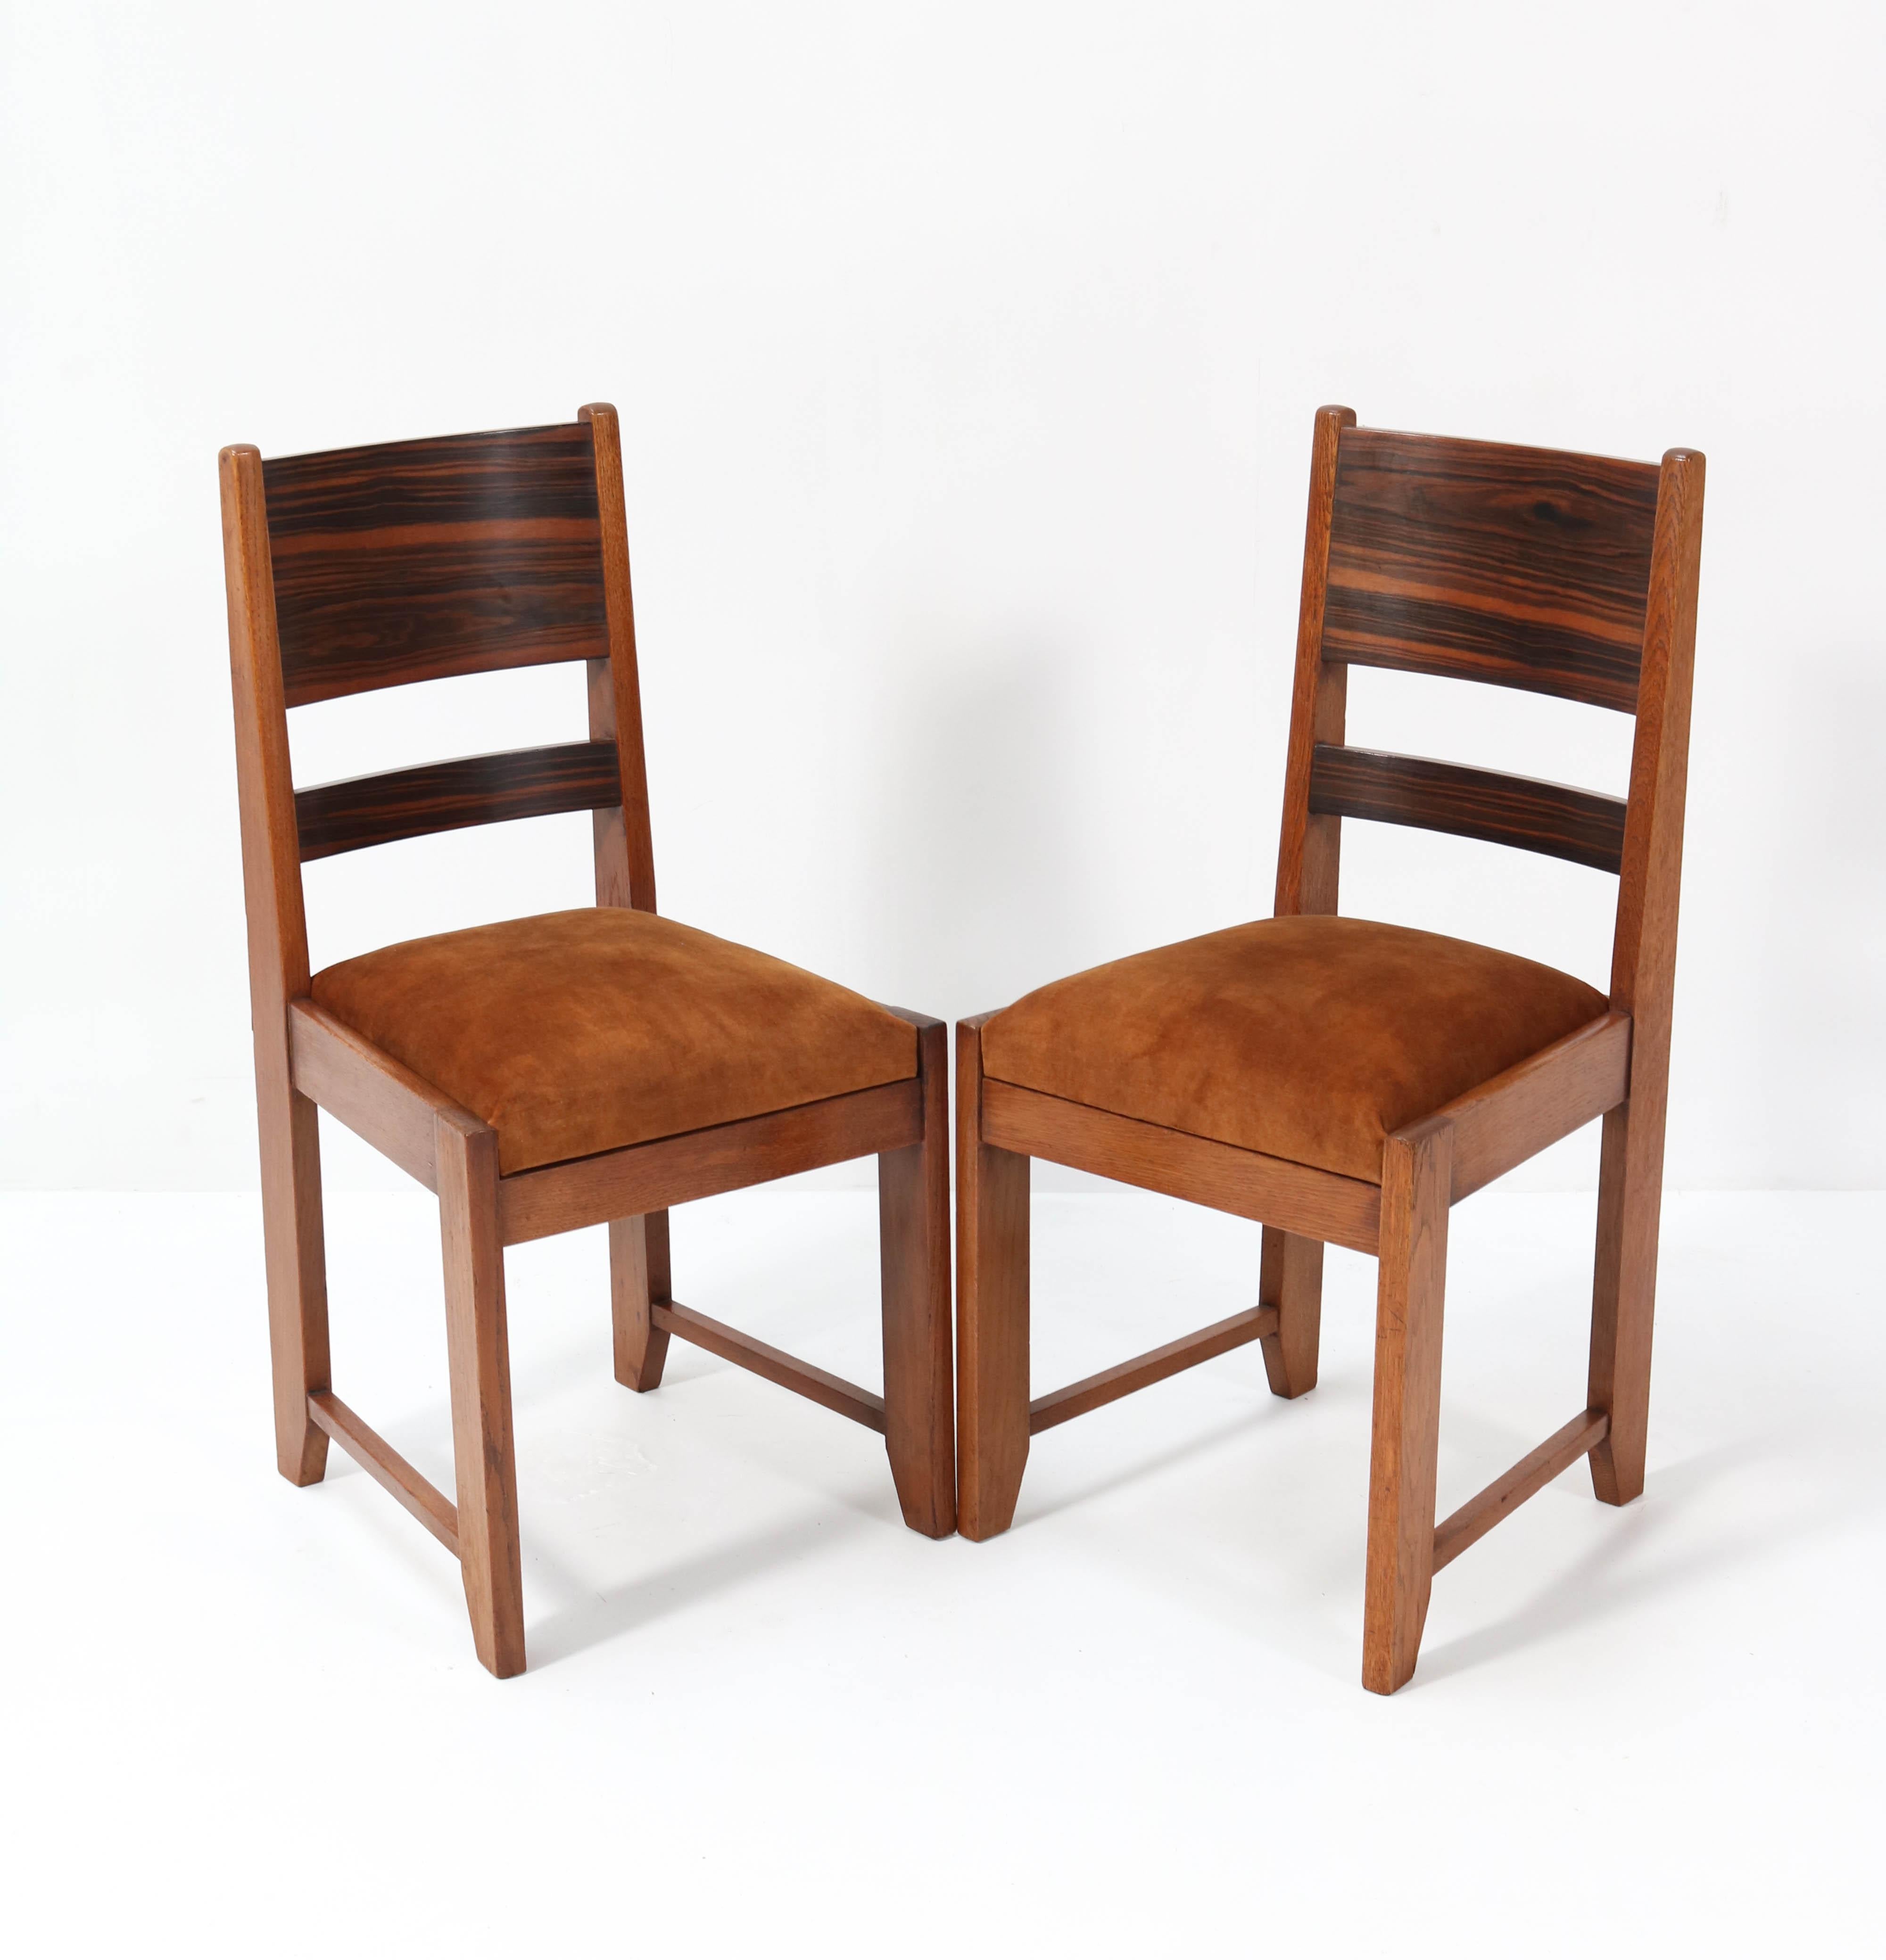 Wonderful set of four Art Deco Haagse School dining room chairs.
The design is in the style of Hendrik Wouda.
Striking Dutch design from the 1920s.
Solid oak with original macassar ebony veneer.
Re-upholstered with velvet.
In very good original